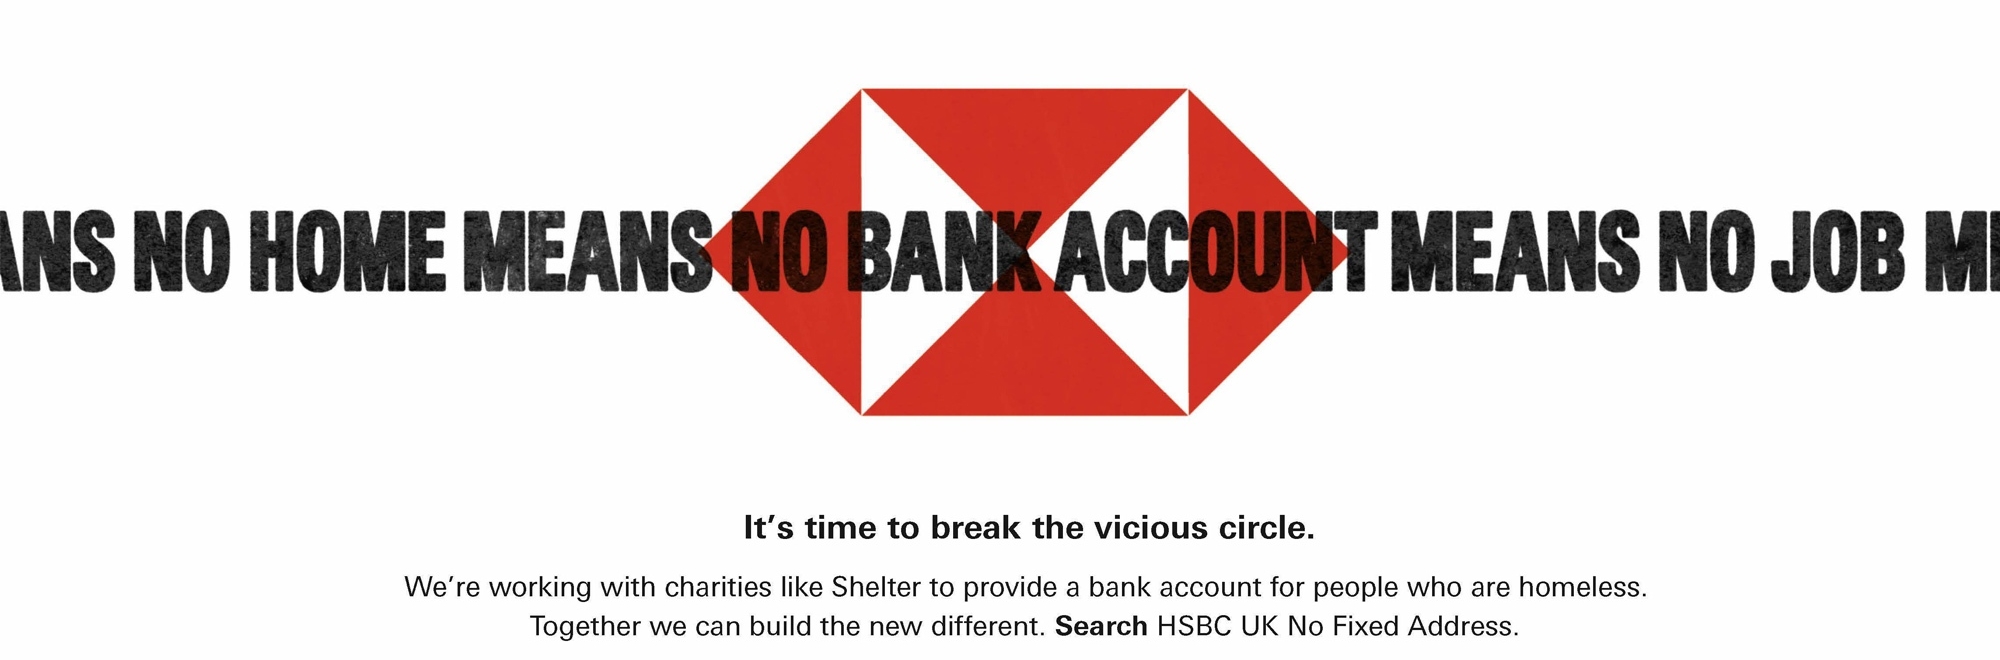 Vicious Circle: HSBC highlights the endless struggle of the homeless to get a bank account, a job and a home